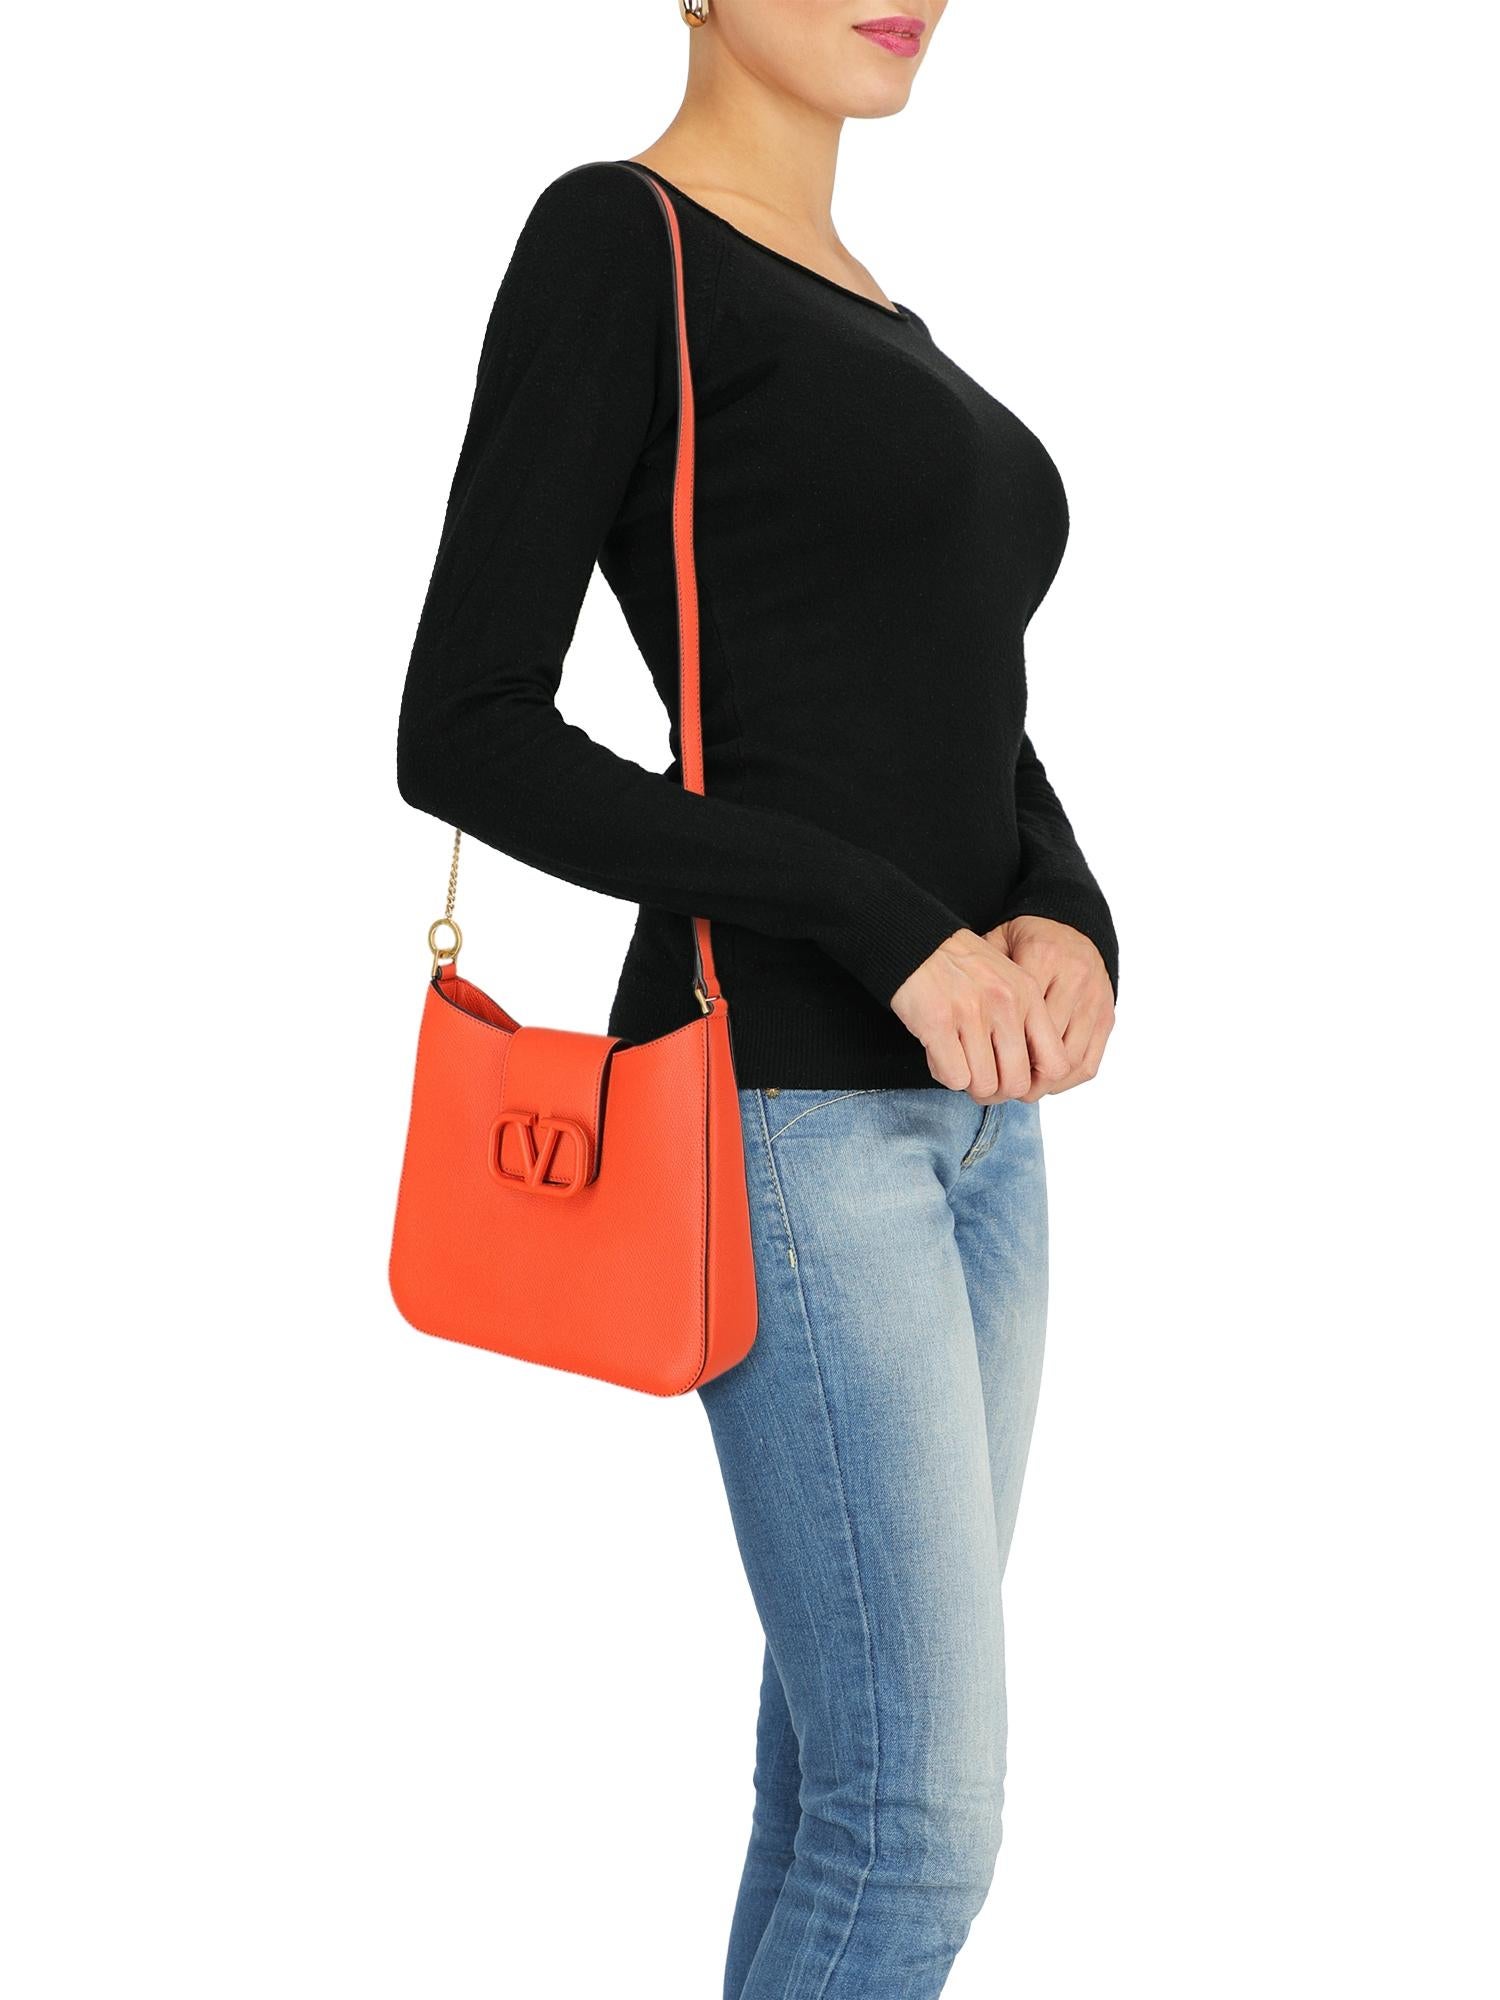 Woman, leather, solid color, front logo, magnetic closure, gold-tone hardware, internal zipped pocket, day bag

Includes:
- Dust bag
- Product care

Product Condition: Excellent

Measurements:
Height: 21 cm
Depth: 5 cm
Width: 23 cm
Shoulder Strap: